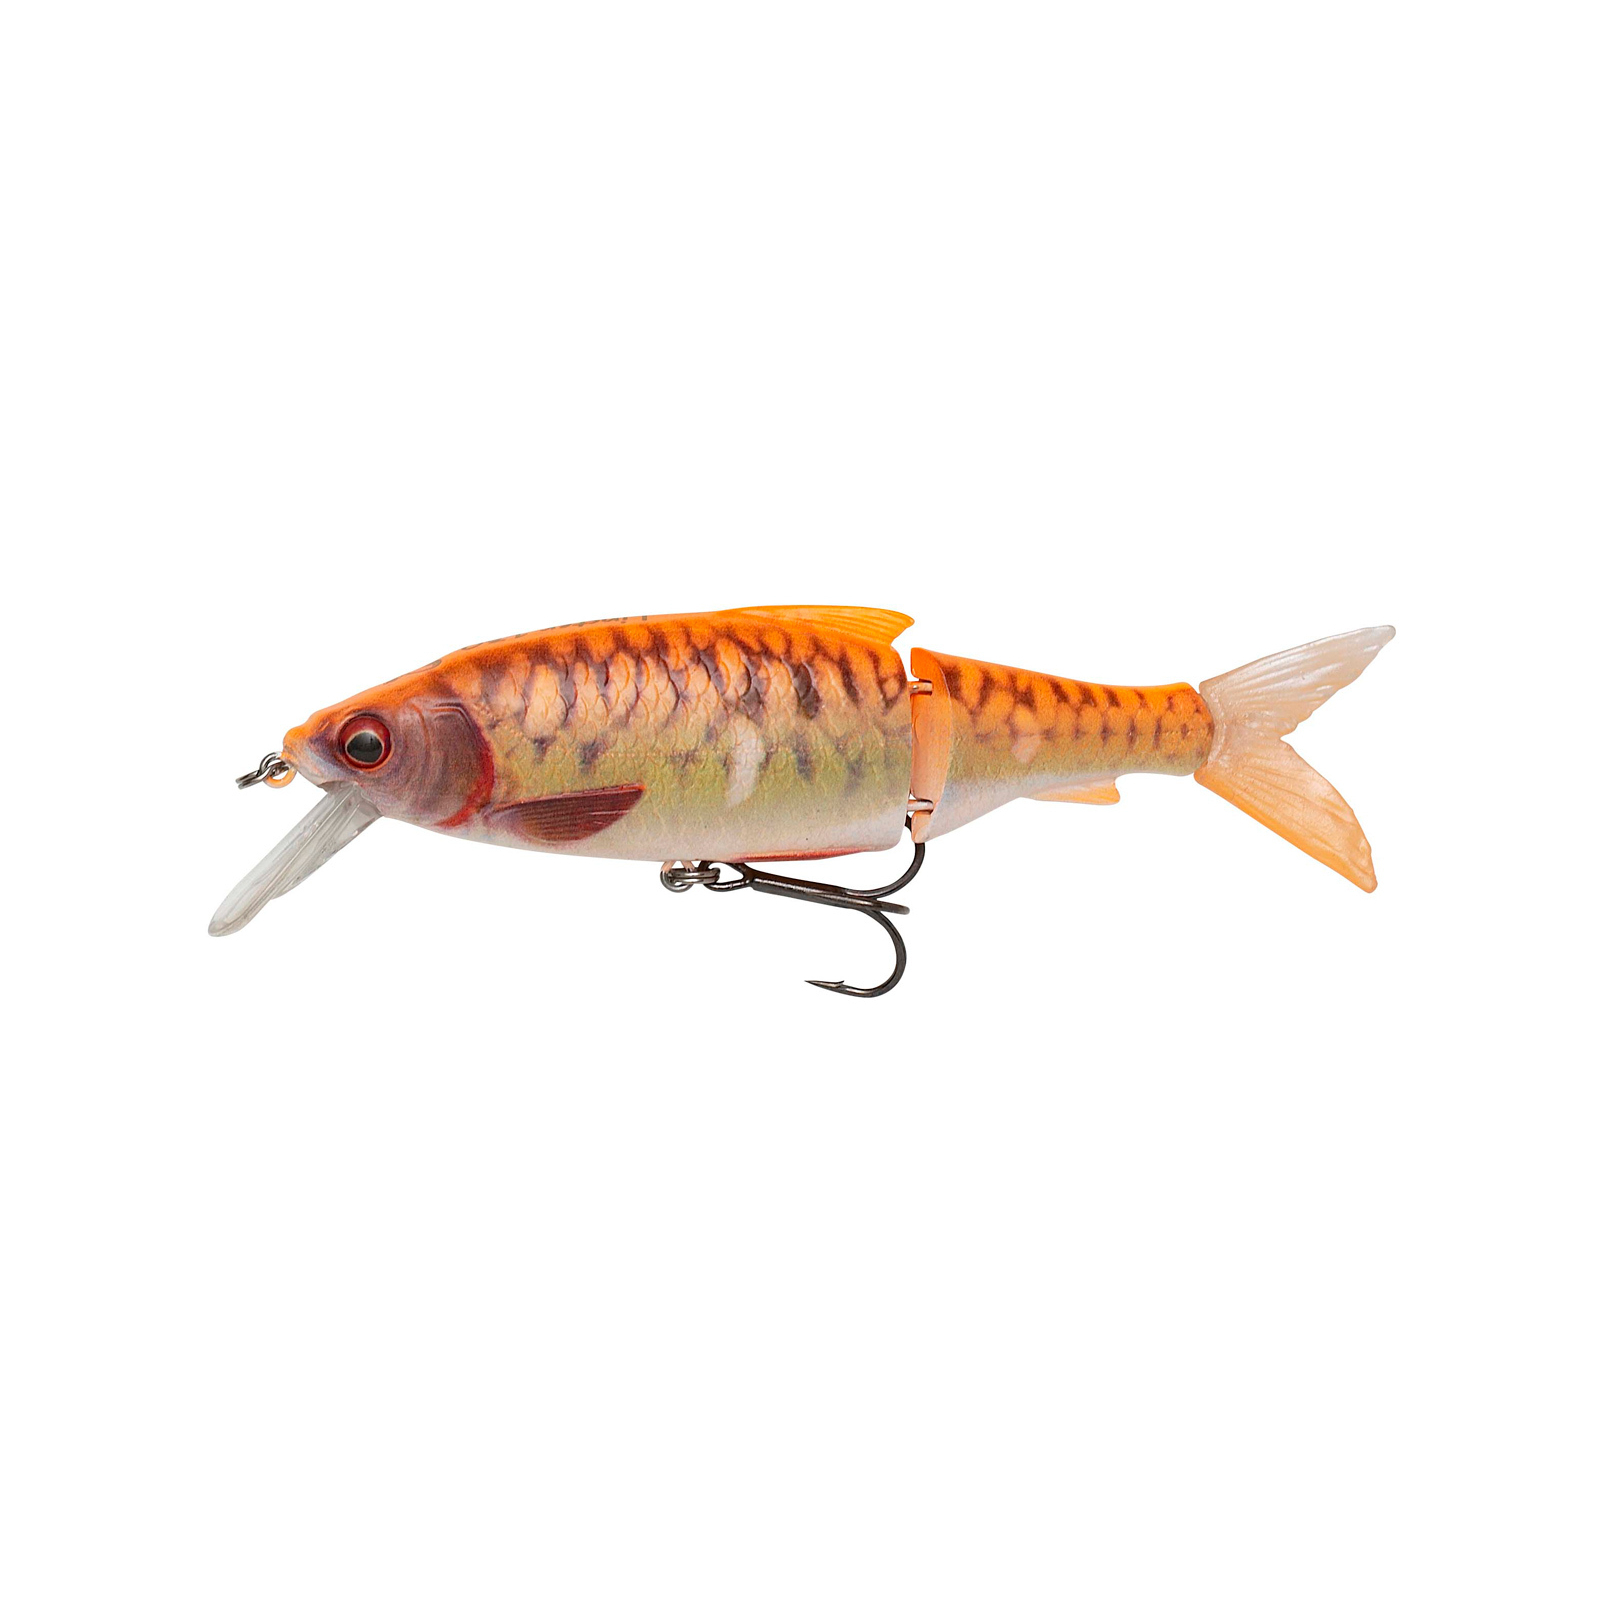 Воблер Savage Gear 3D Roach Lipster 182SF 182mm 67.0g 06-Gold Fish PHP (1854.09.23)